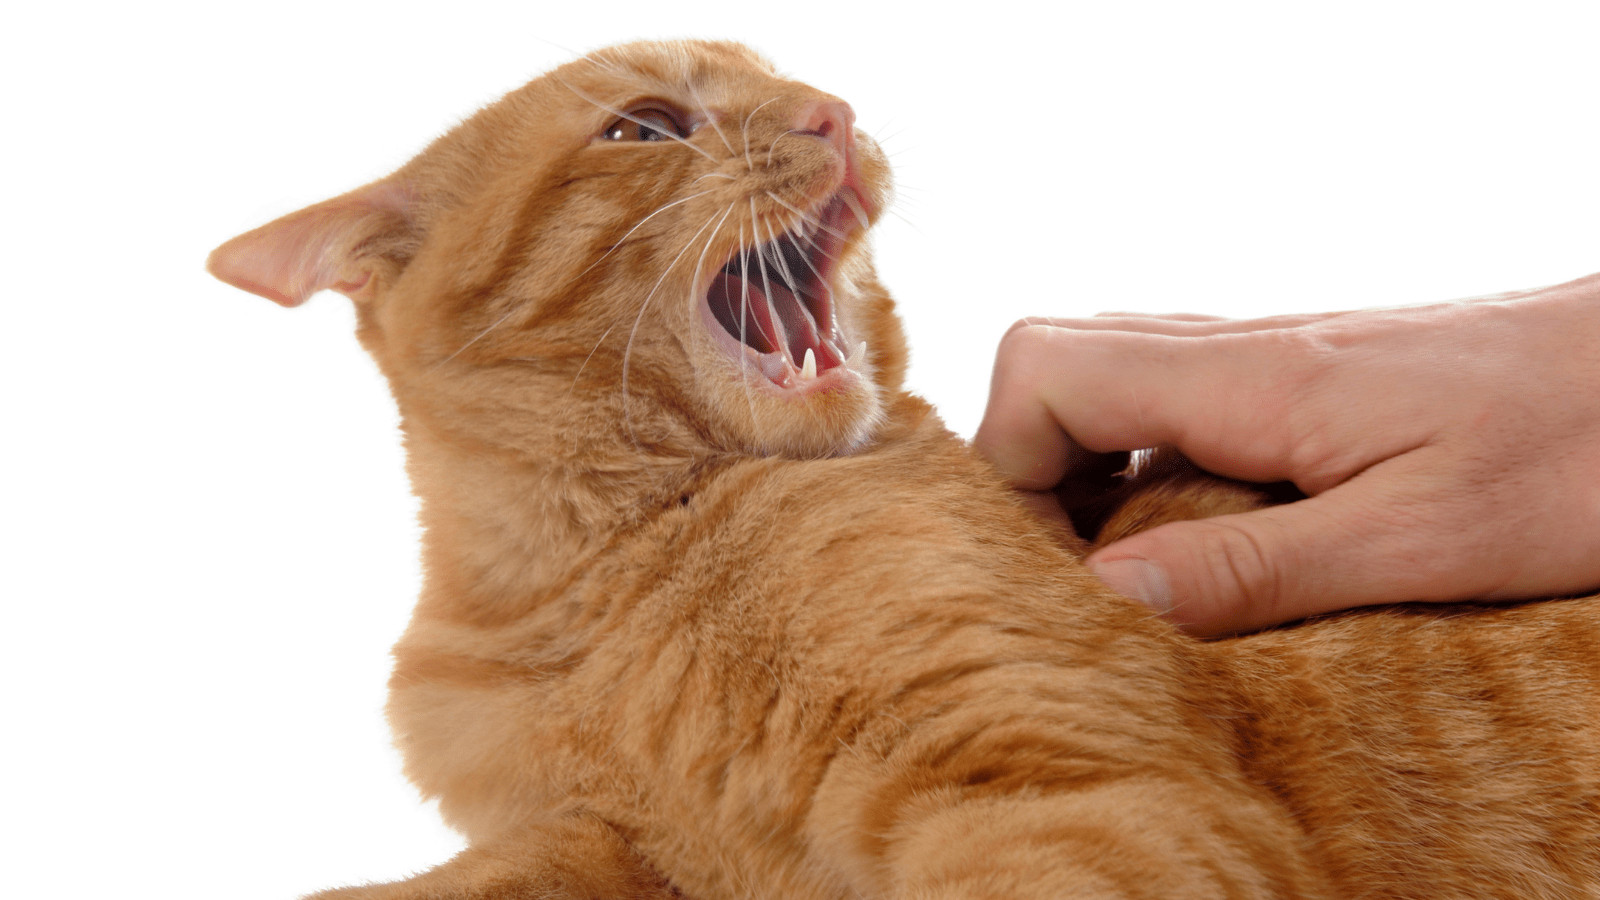 How to calm an aggressive cat